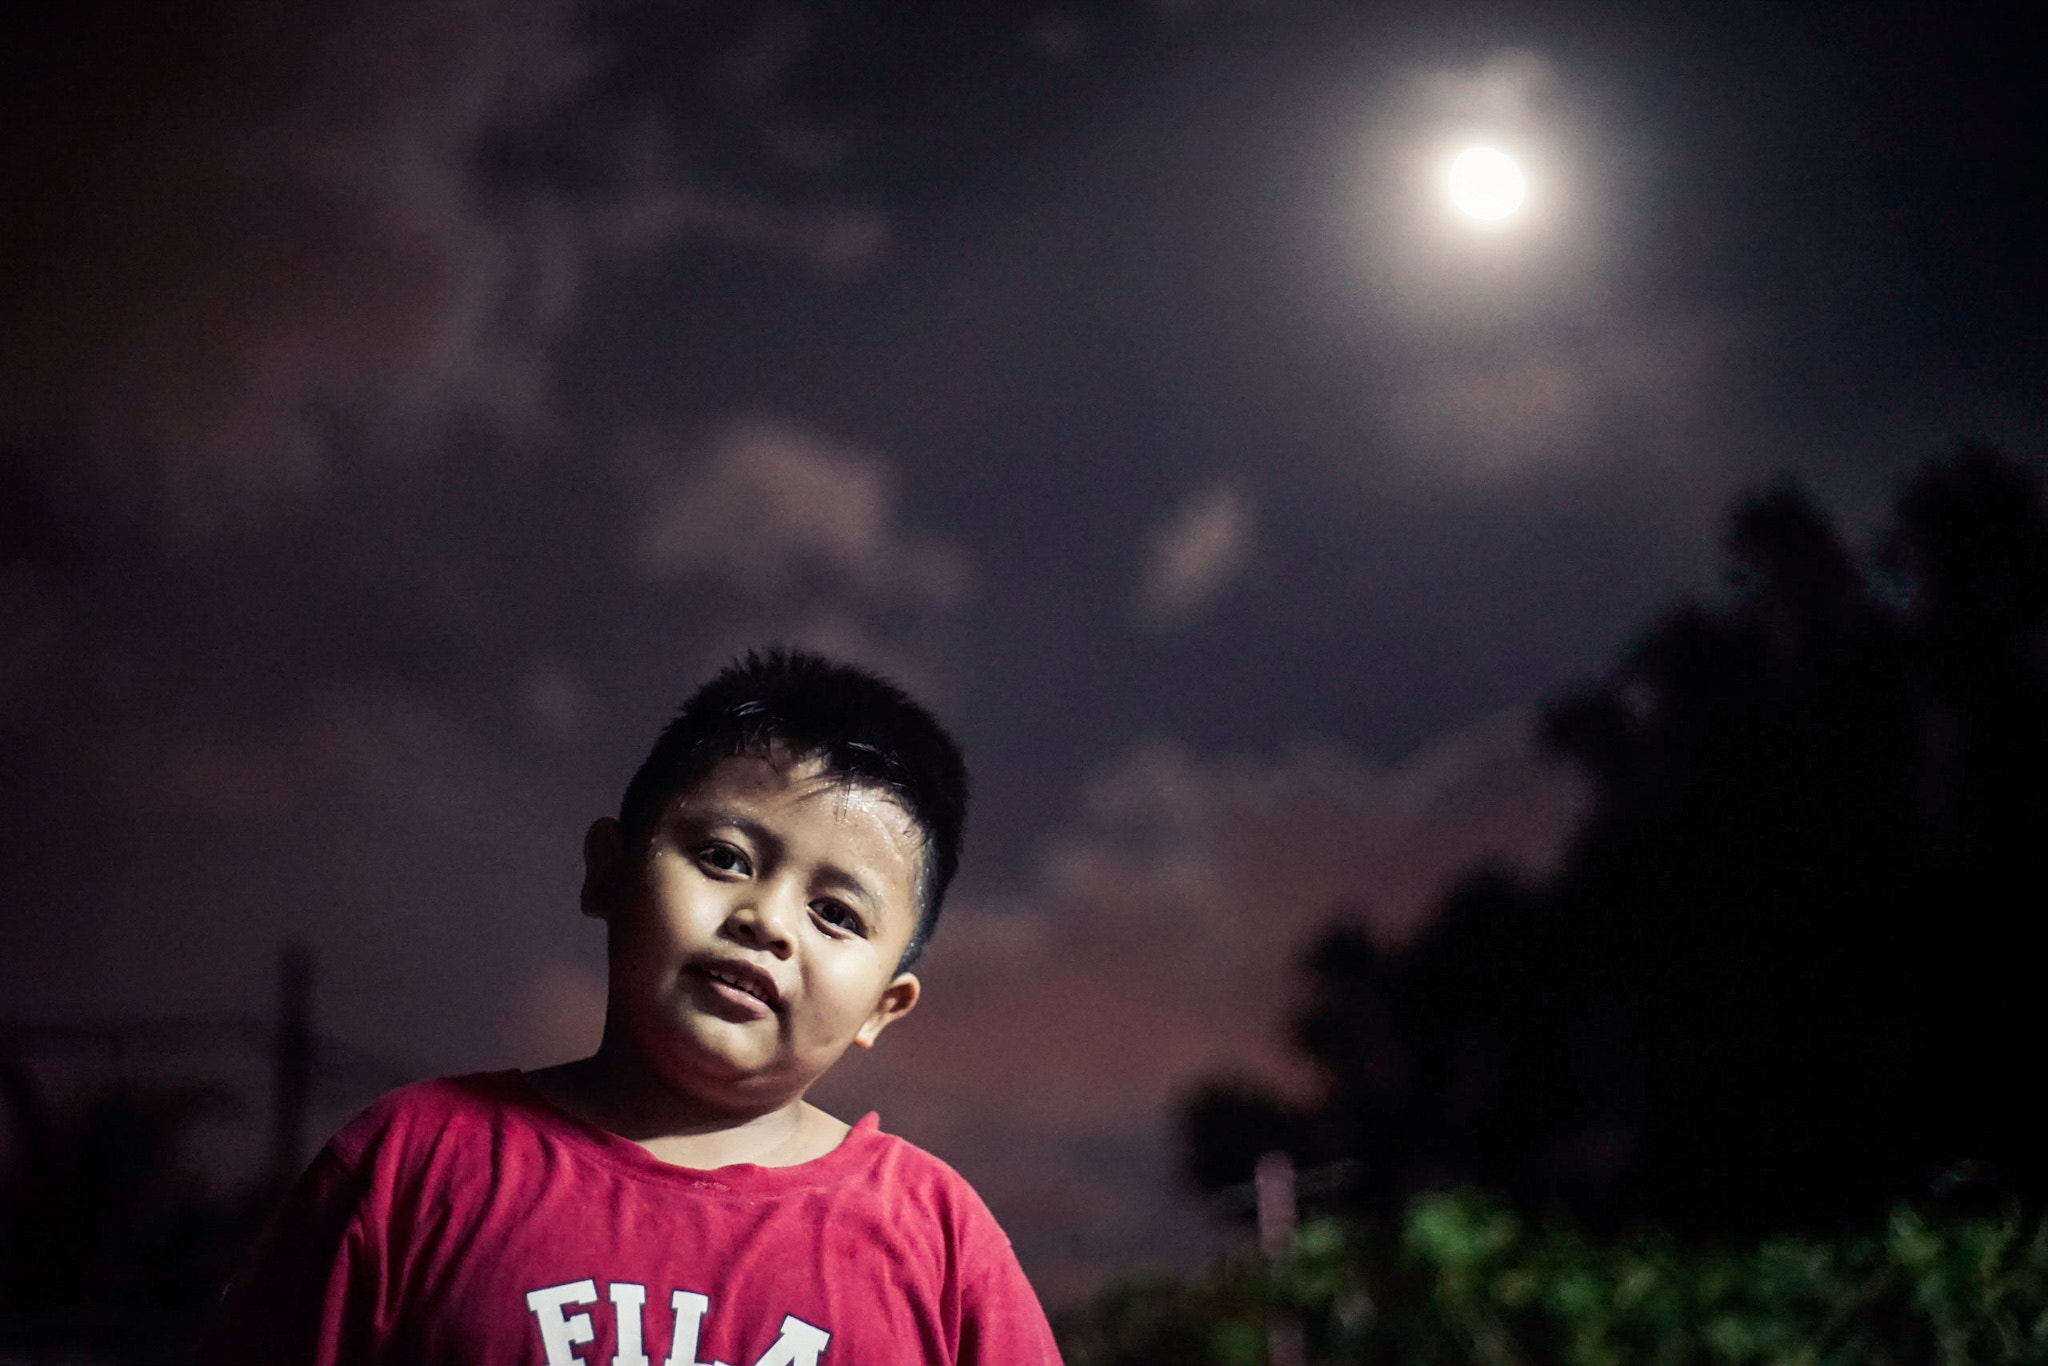 Sony a7 II + Minolta AF 50mm F1.7 sample photo. Playtime at night under the bright moon photography